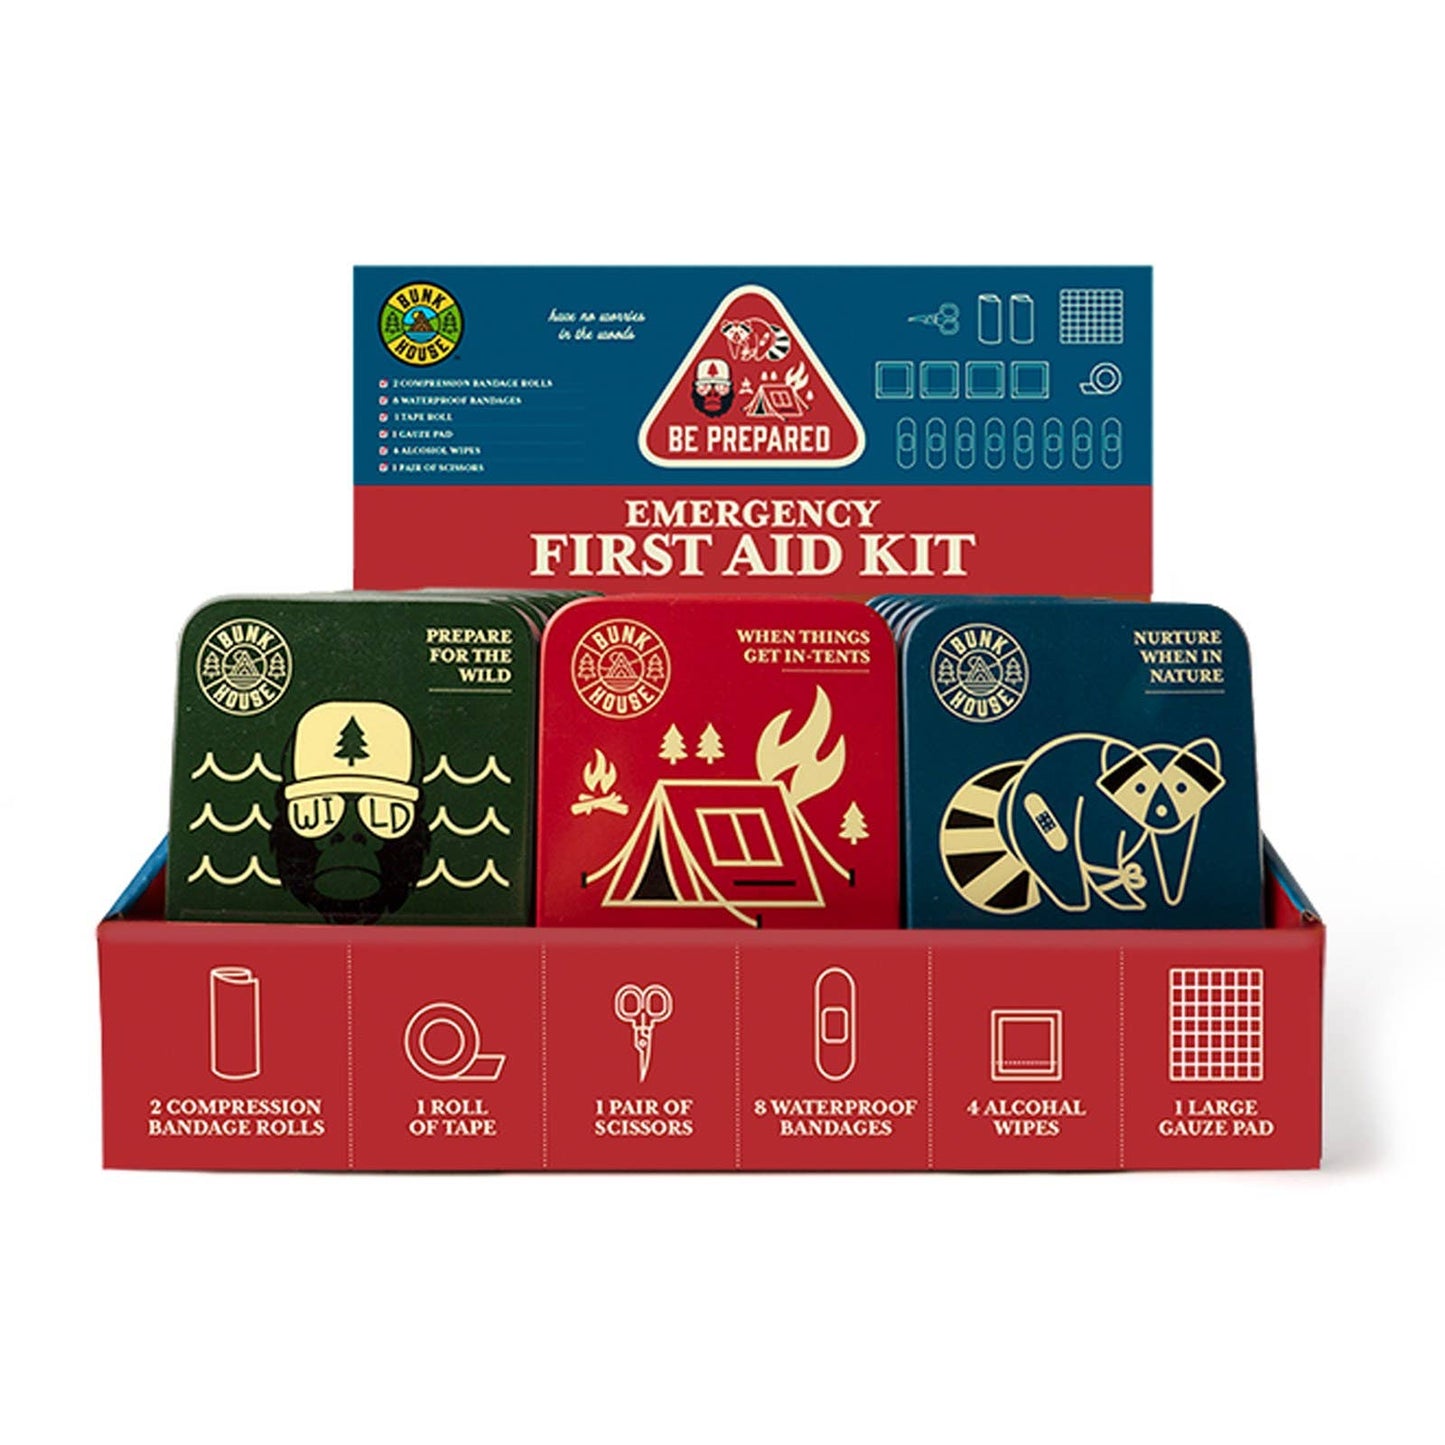 multiple emergency first aid kits shown in a display against a white backdrop